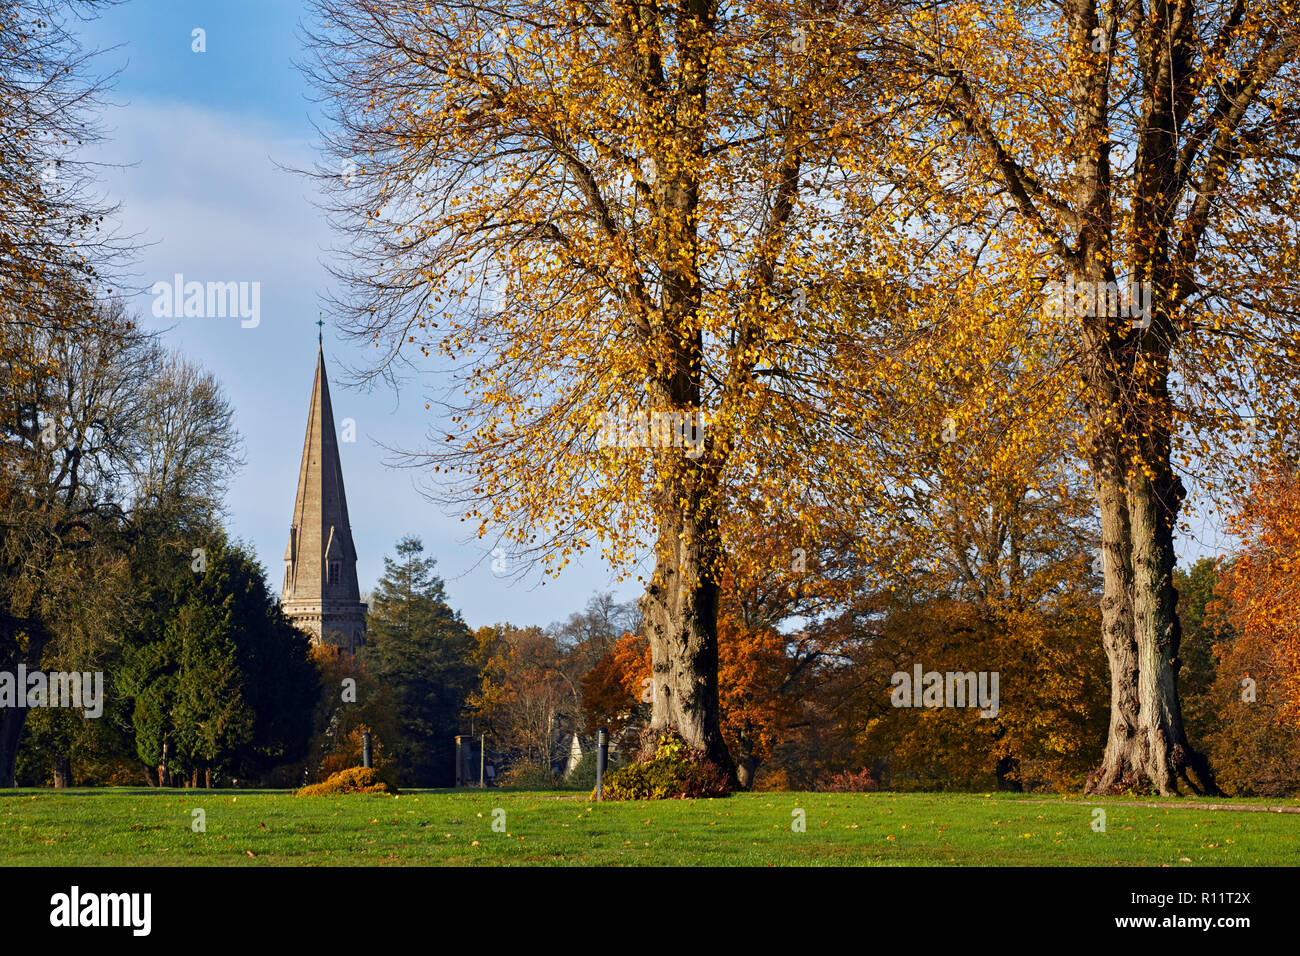 Autumnal Lime Trees on Denbies Estate with the spire of St Barnabas Church beyond. Ranmore Common, Surrey, England. Stock Photo